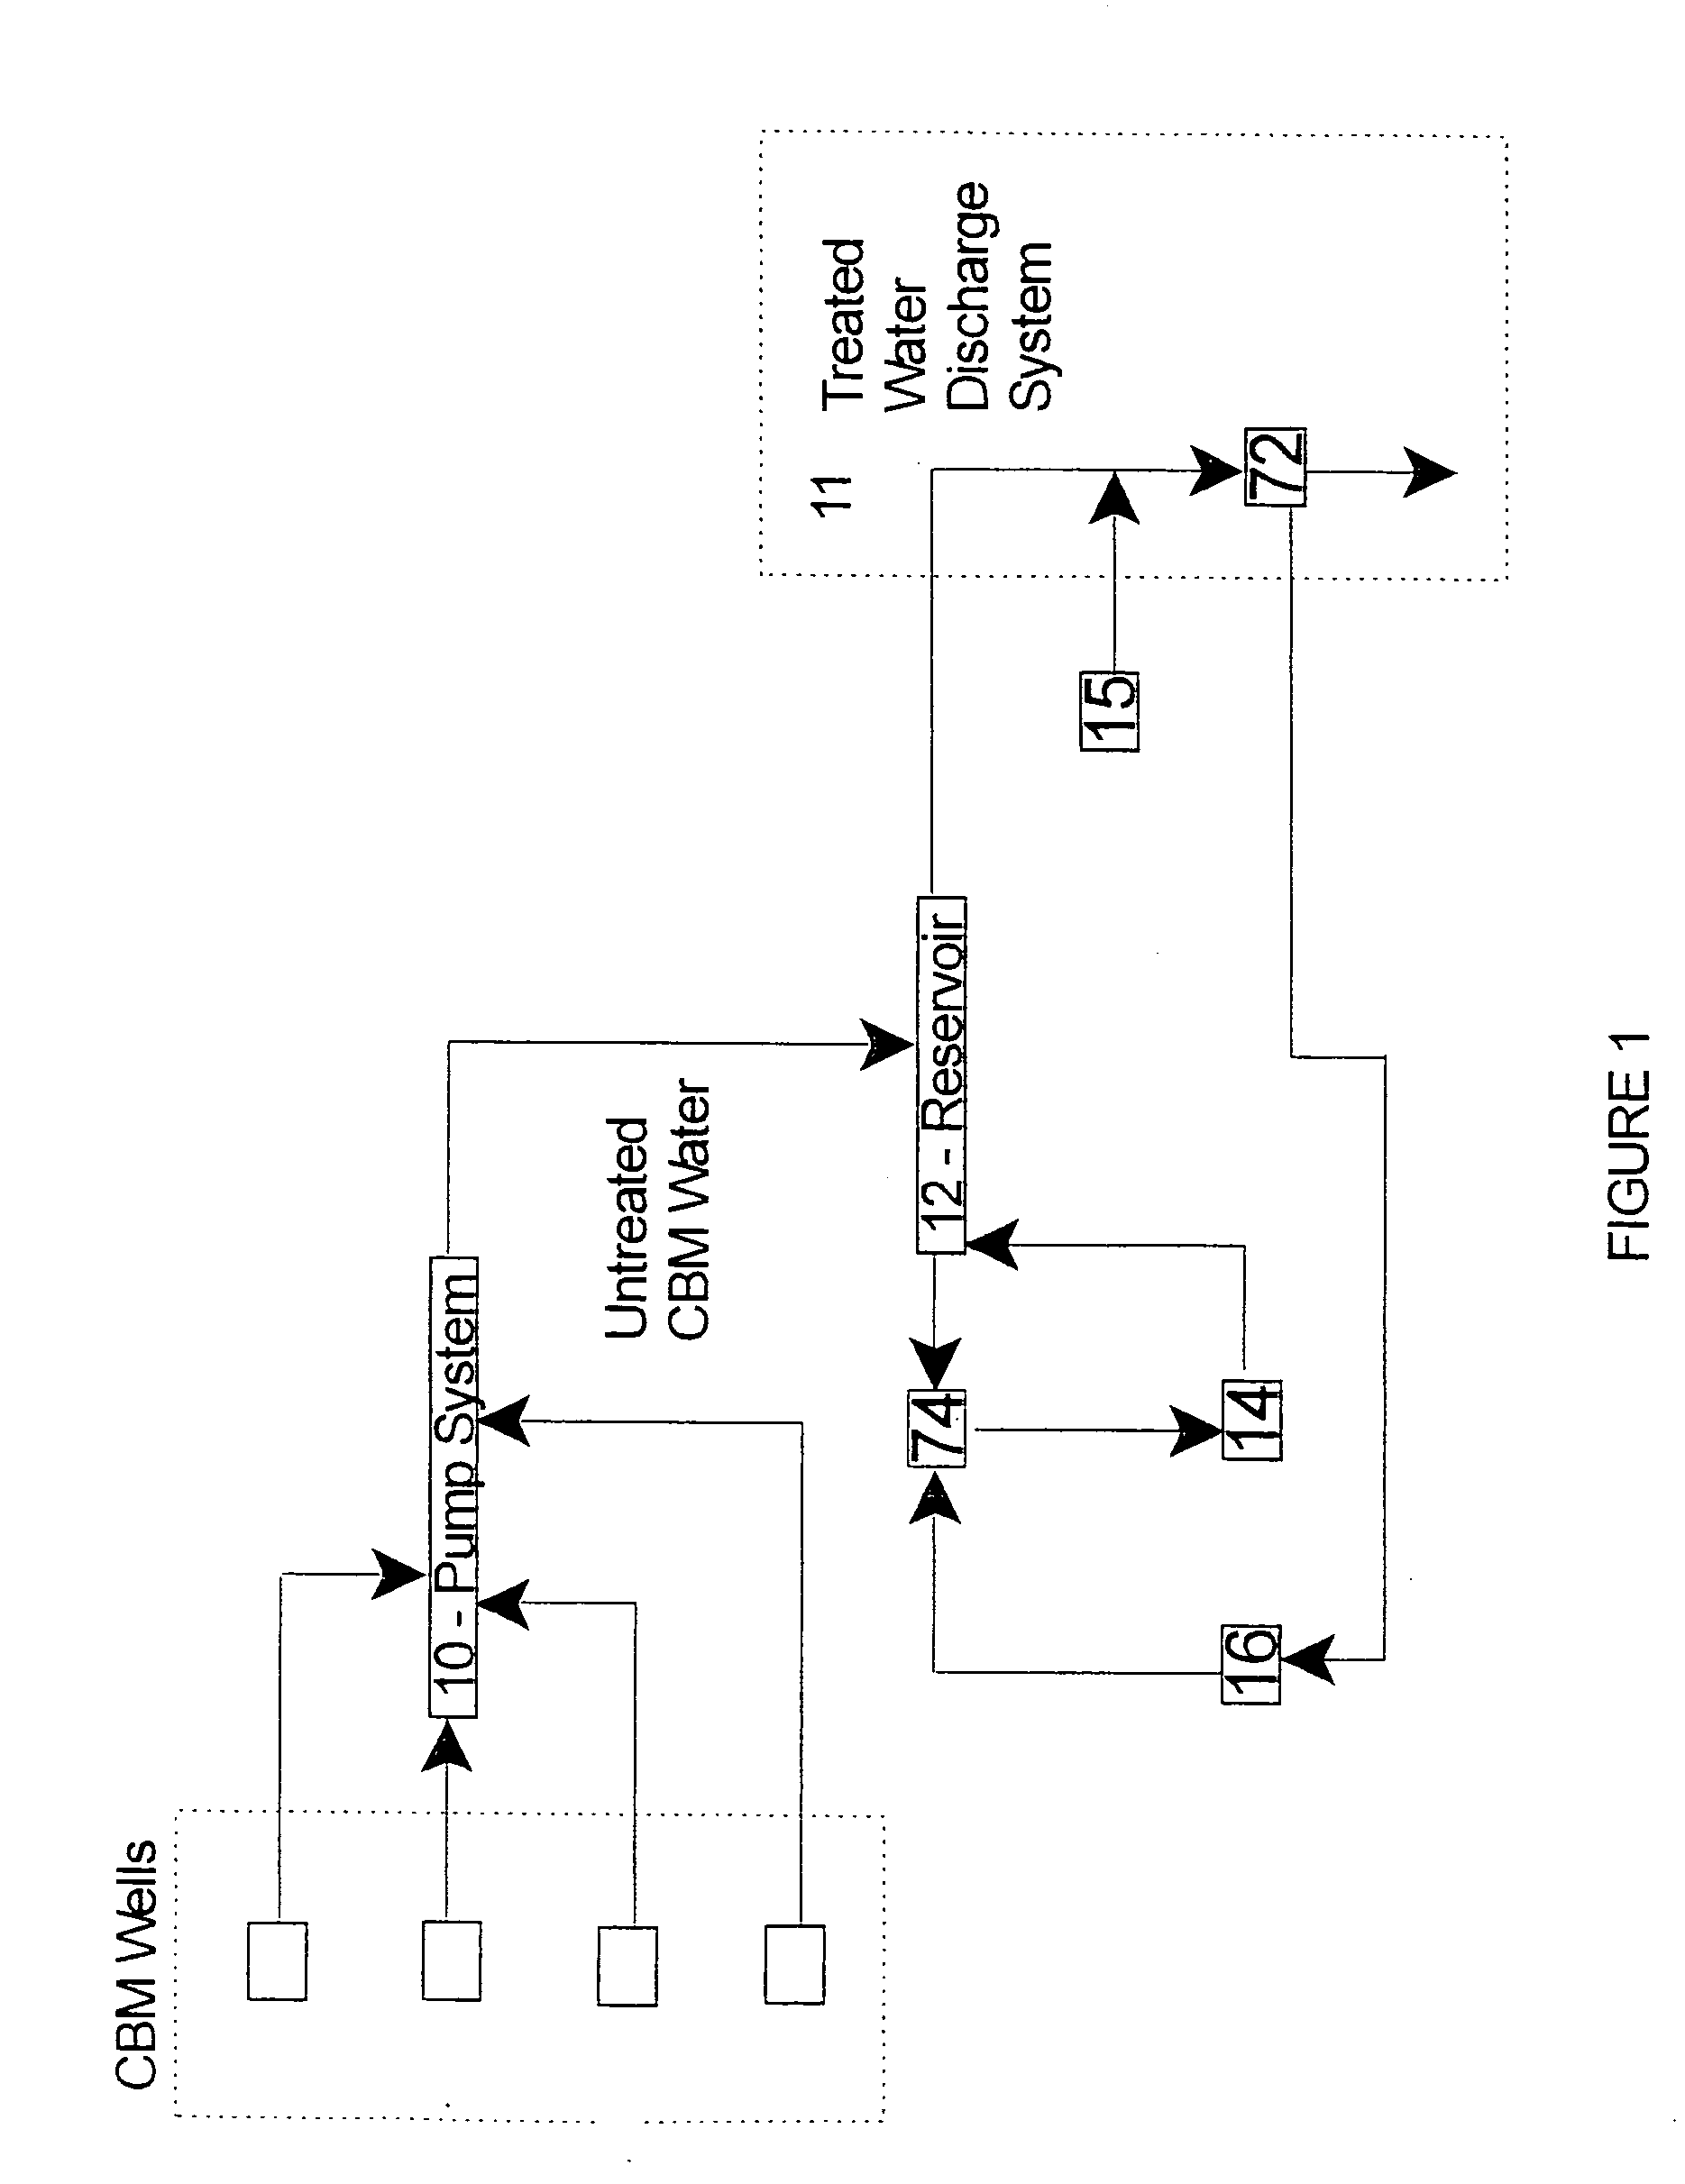 Coal-bed-methane water treatment system